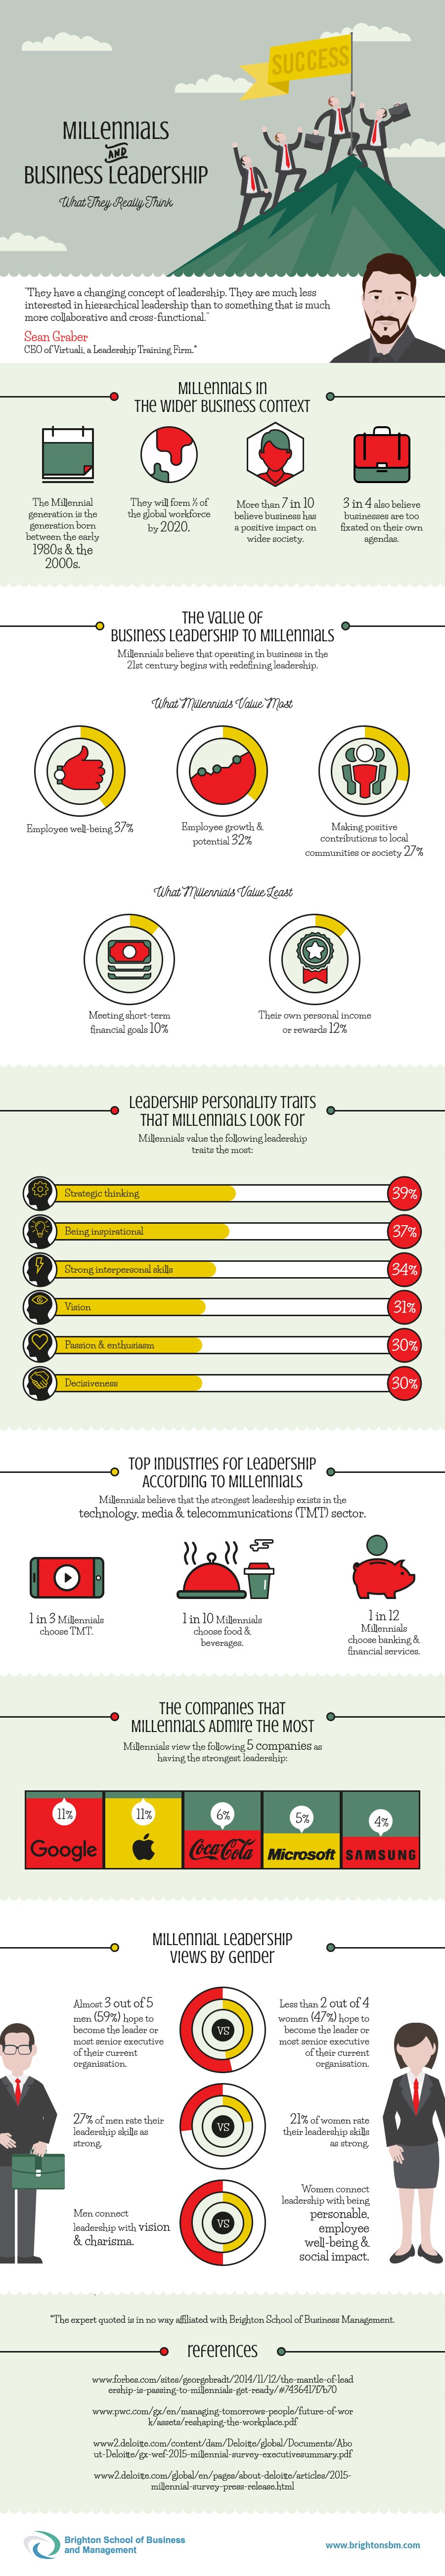 Millennials-and-Business-Leadership-Infographic